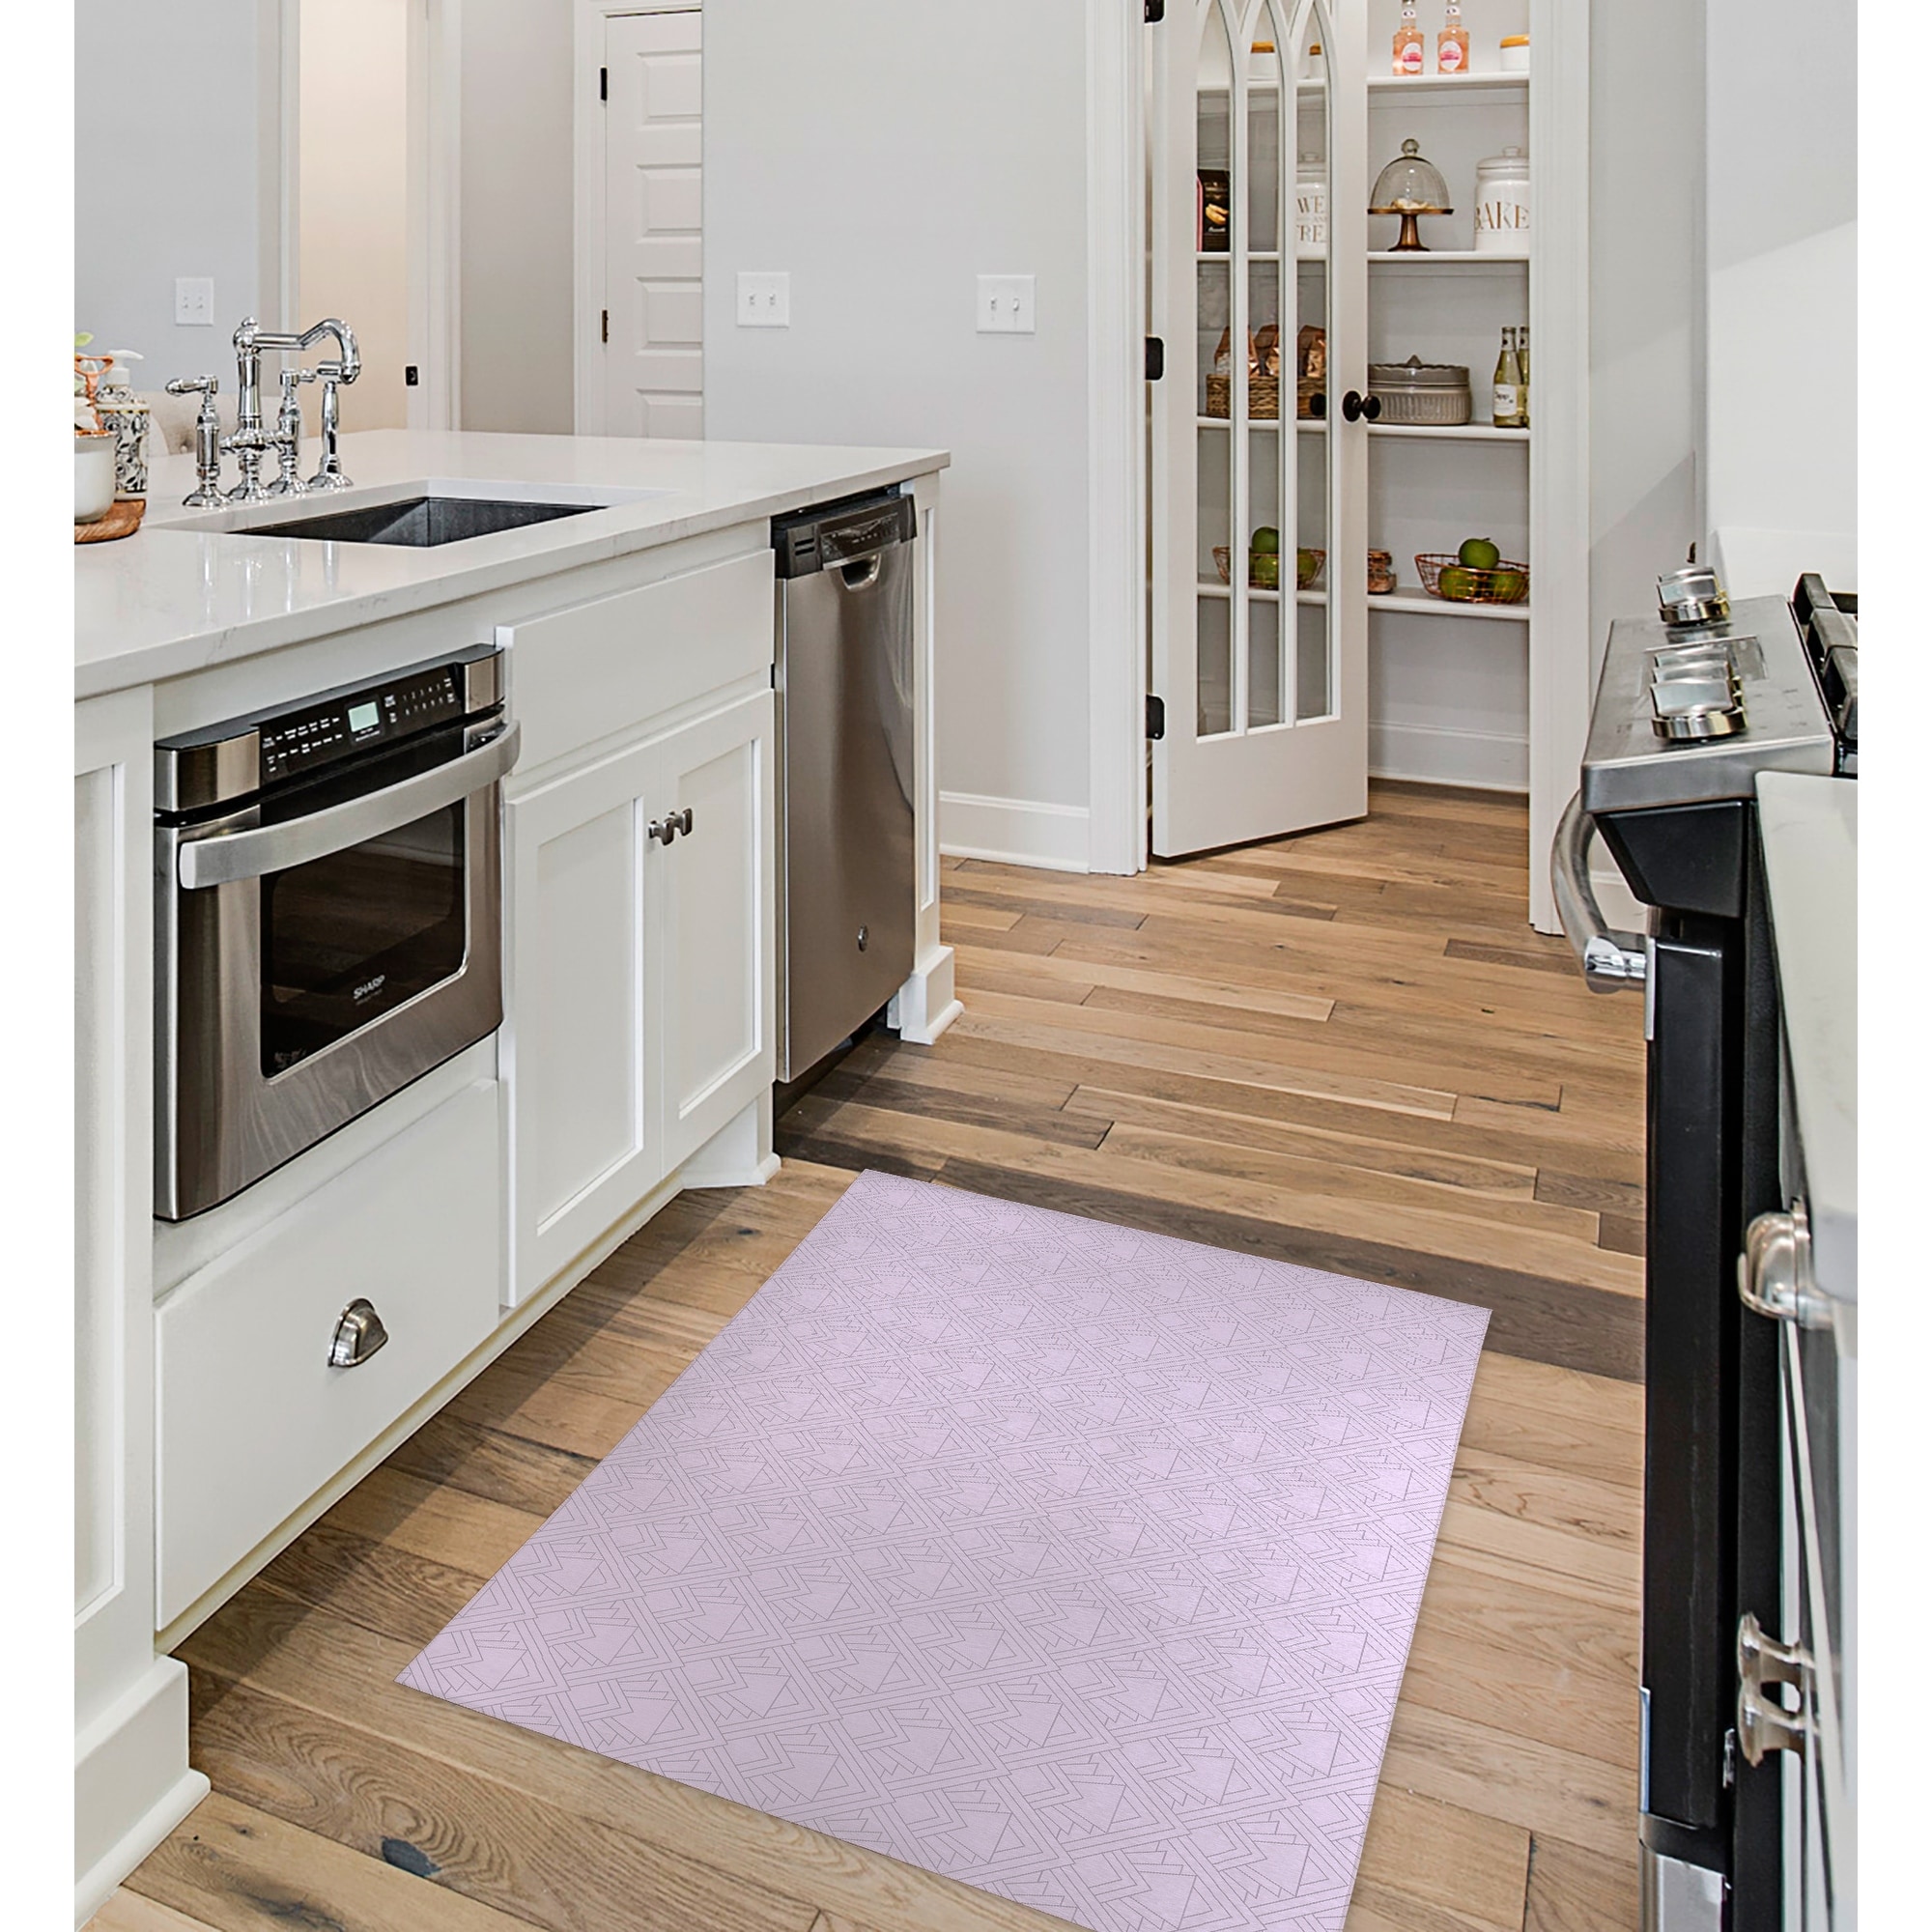 https://ak1.ostkcdn.com/images/products/is/images/direct/ac94a6c6782b55d30ee8373ab45a5721d556a41e/ART-DECO-APEX-LAVENDER-Kitchen-Mat-By-Becky-Bailey.jpg